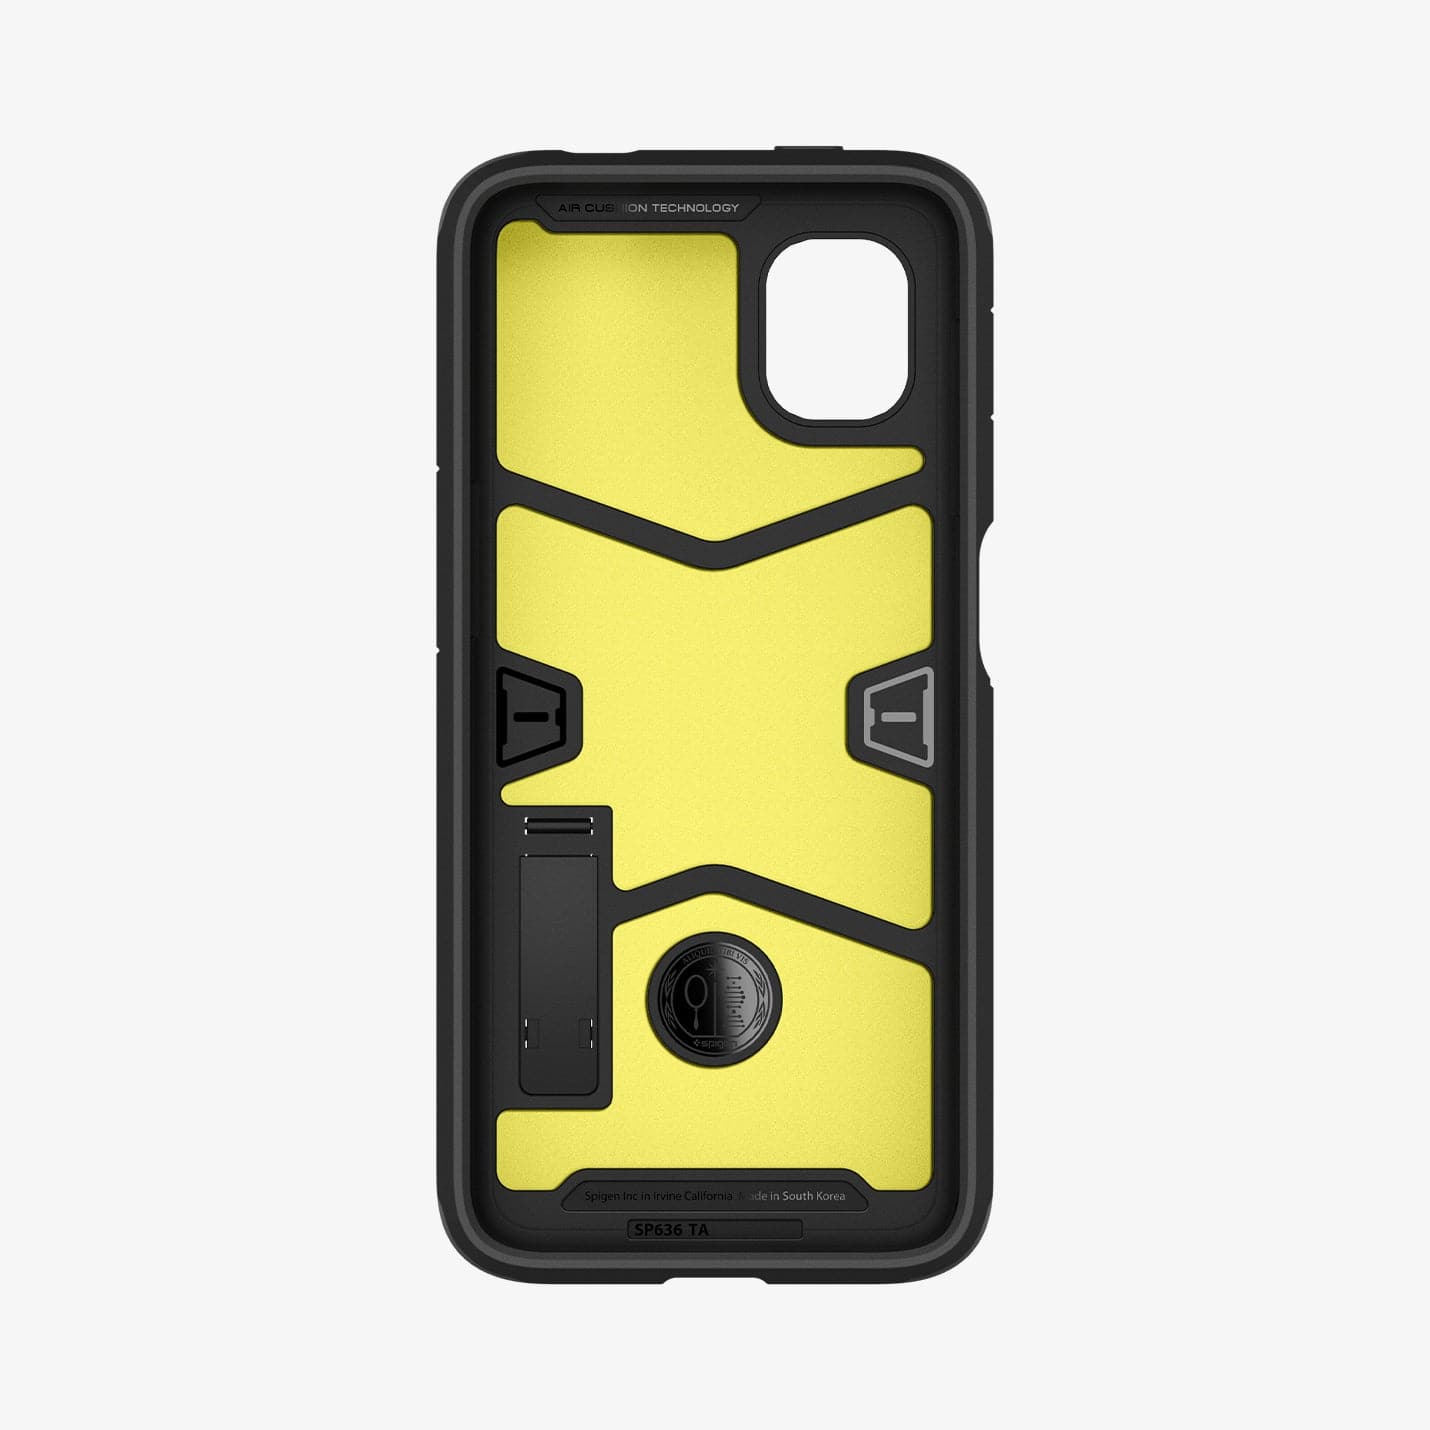 ACS04601 - Galaxy XCover 6 Pro Tough Armor Case in black showing the inside of case